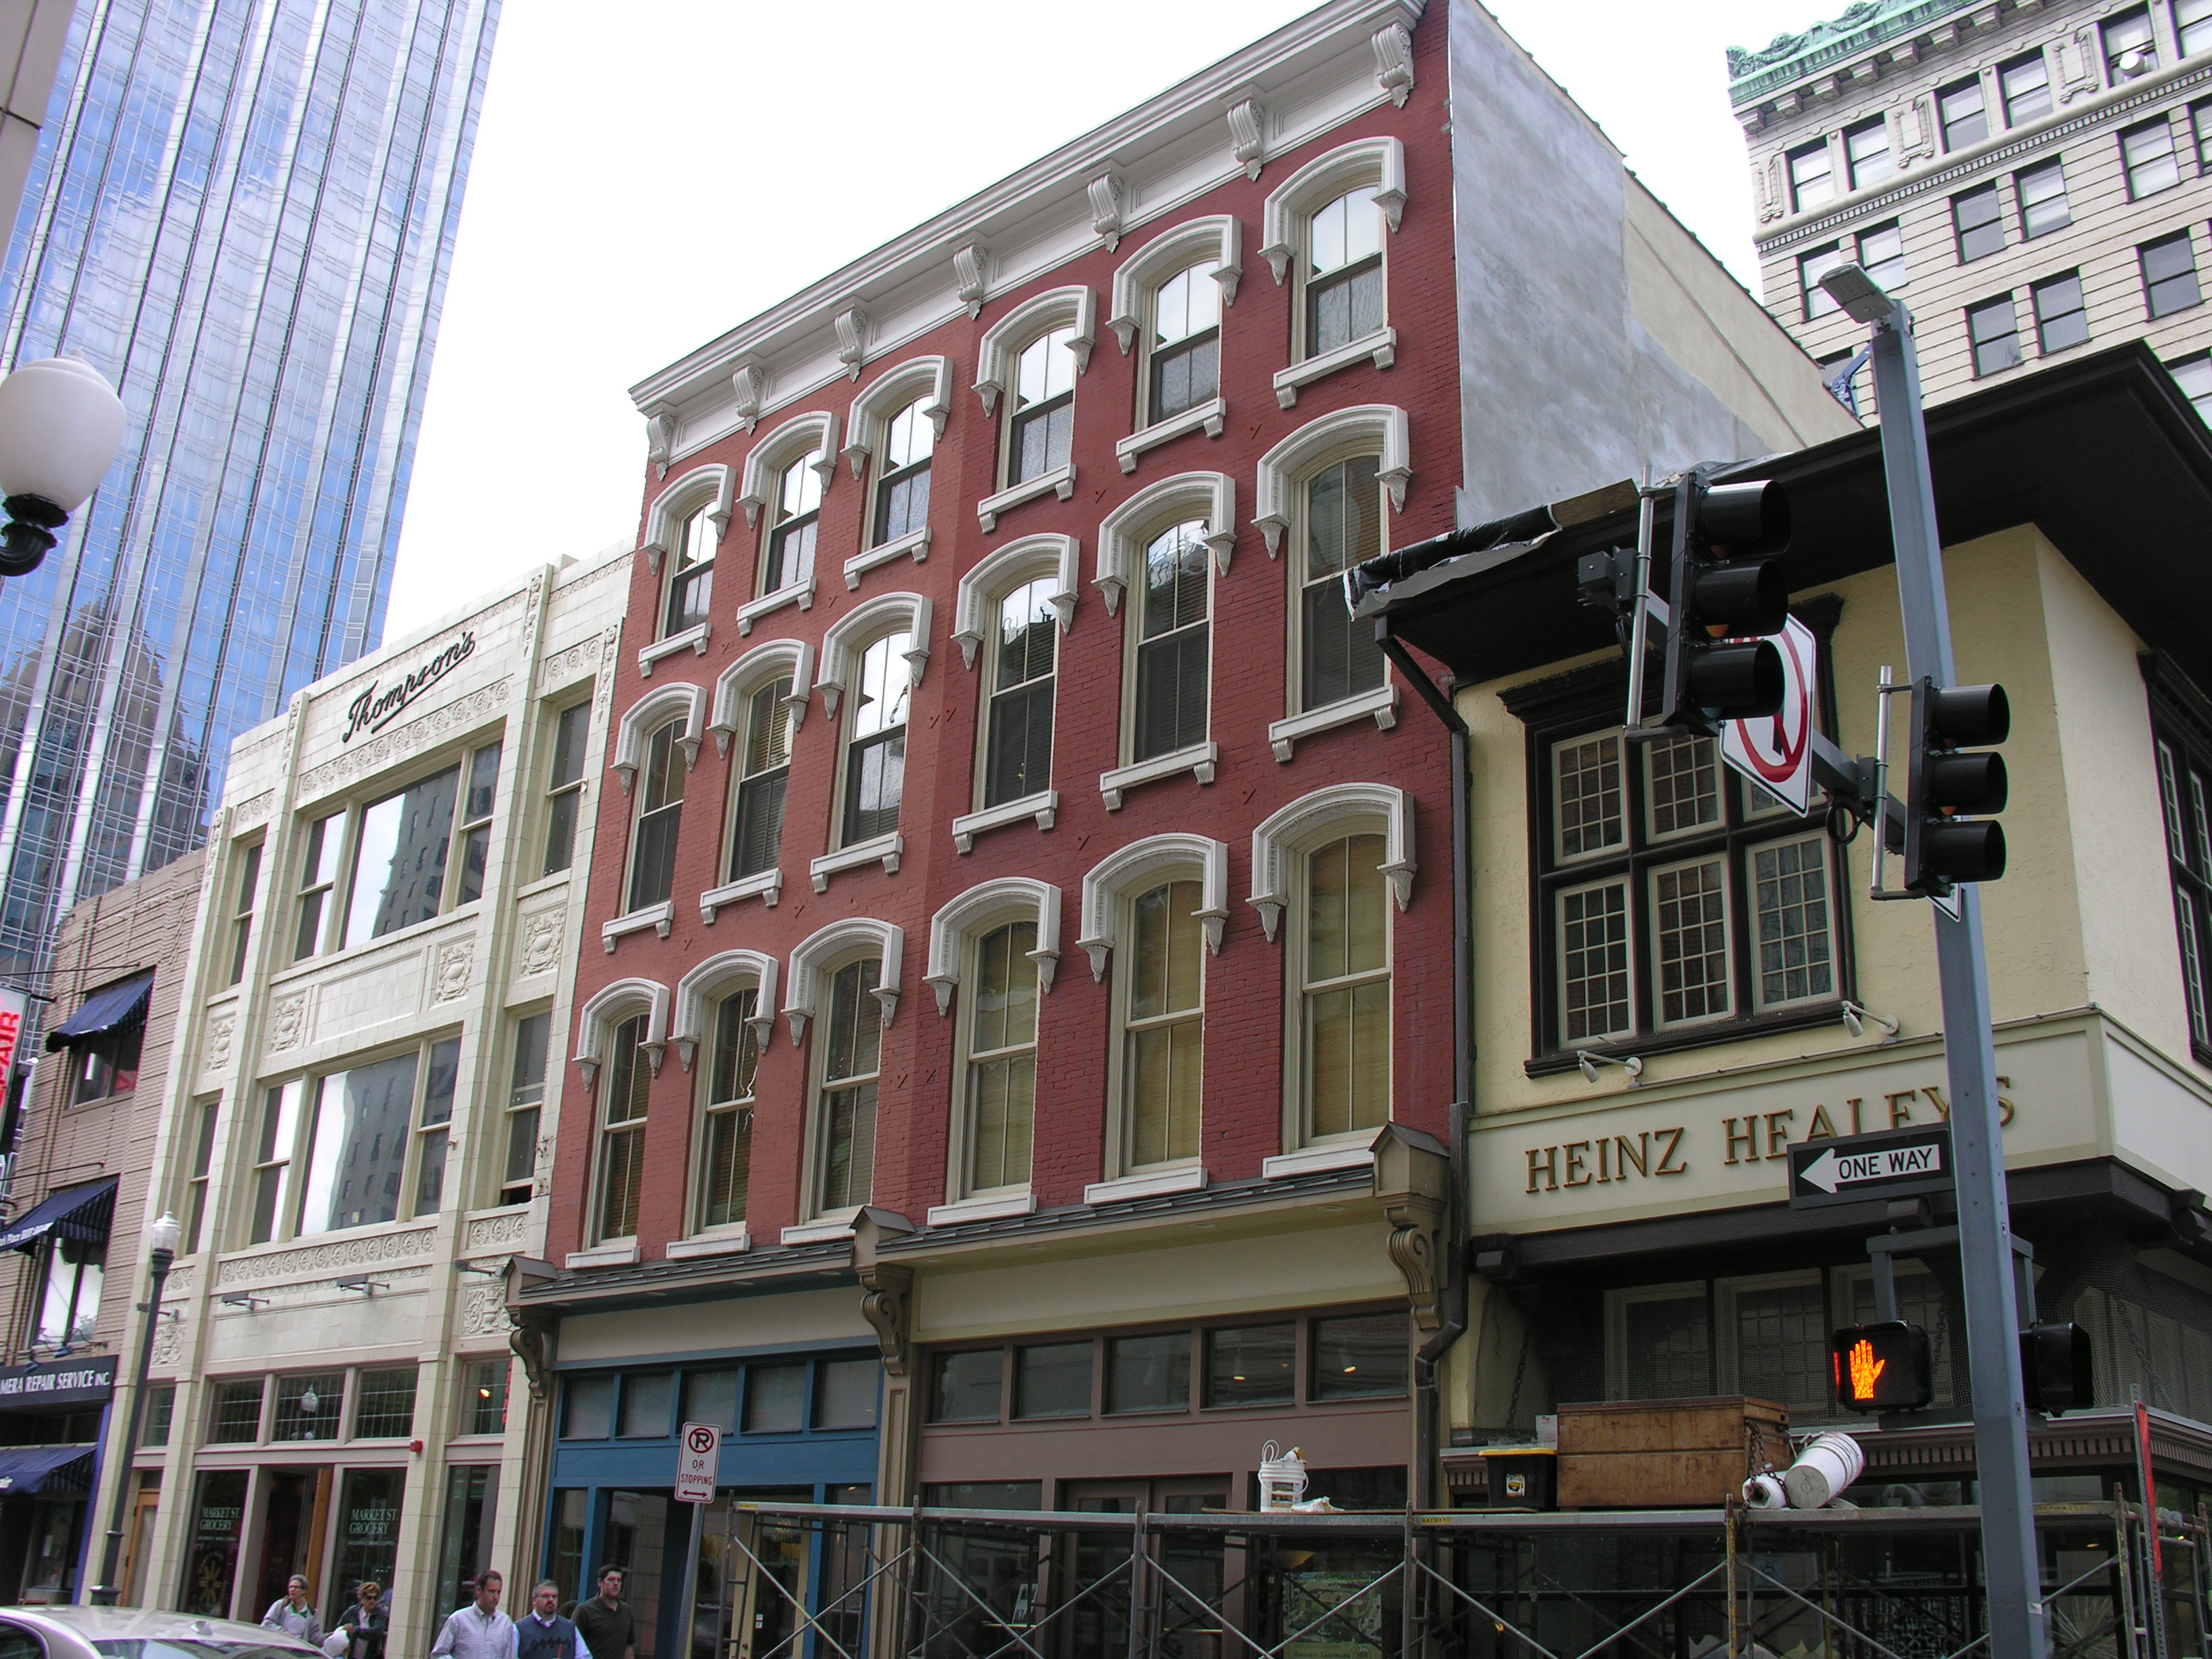 4-story brick buildings with storefront at street level.